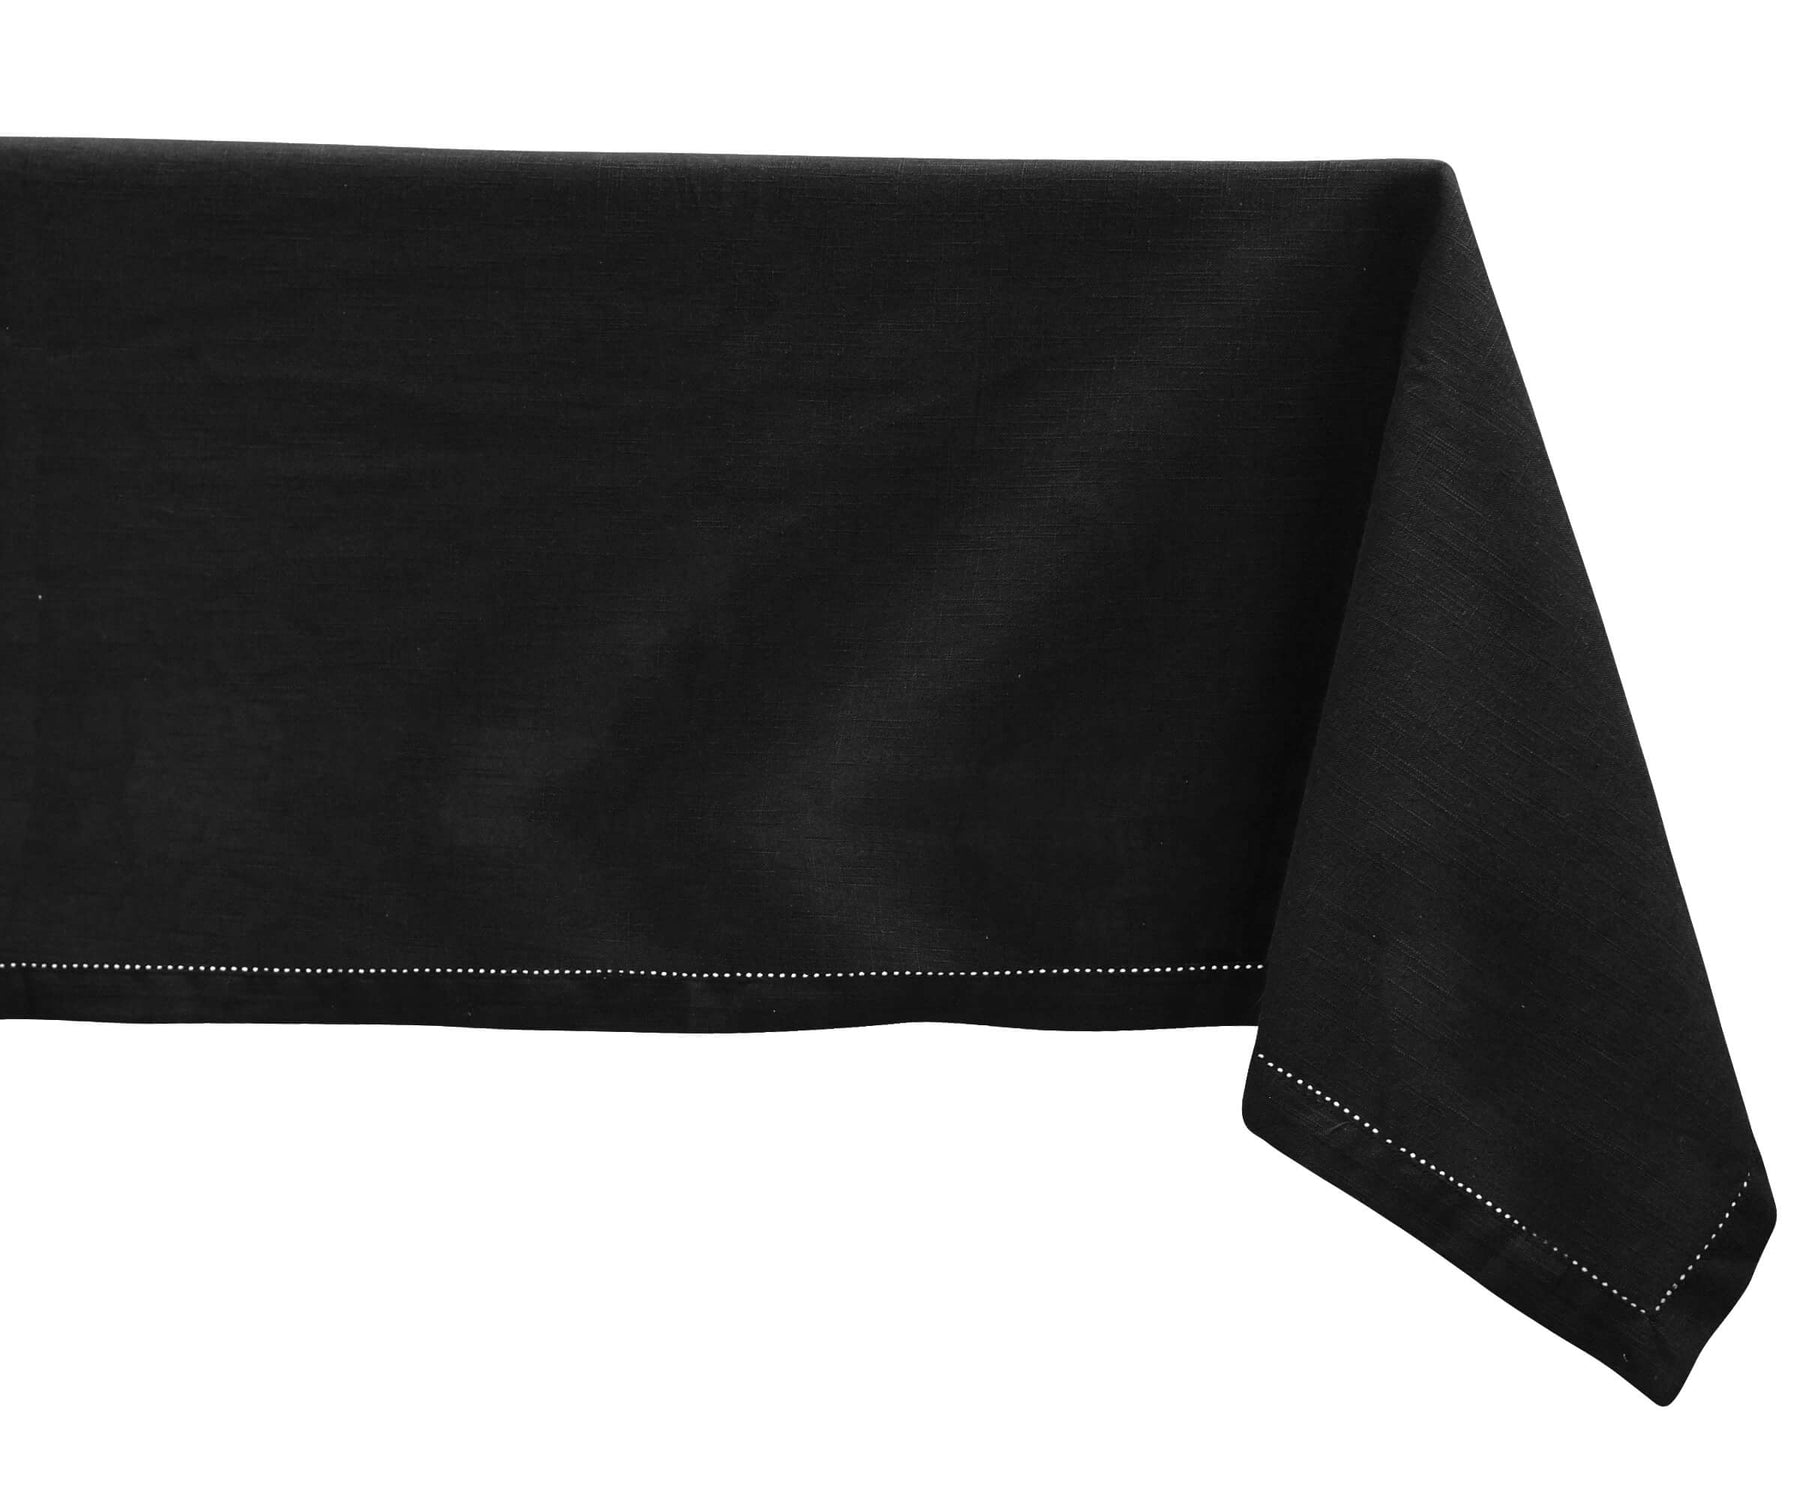 "Set a sophisticated scene with black, embrace spring vibes, and celebrate holidays in style with our diverse tablecloth selection."